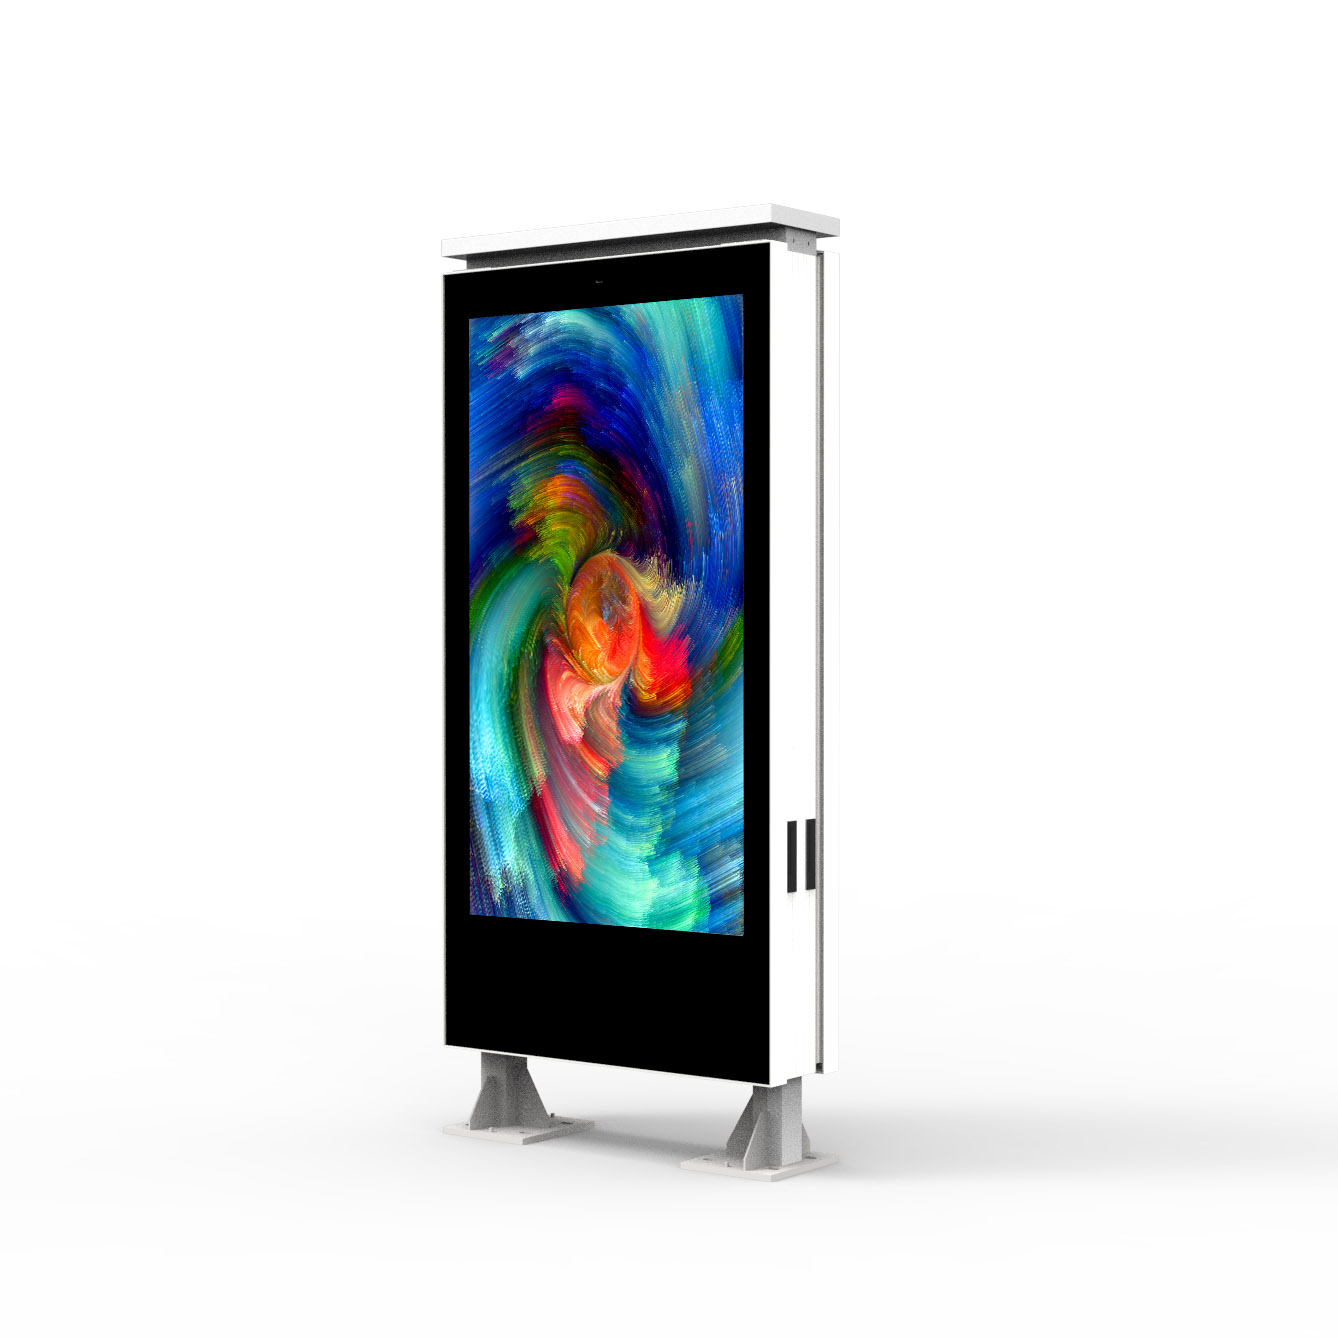 65" Double-sided Bus Shelters Outdoor LCD LCD Display